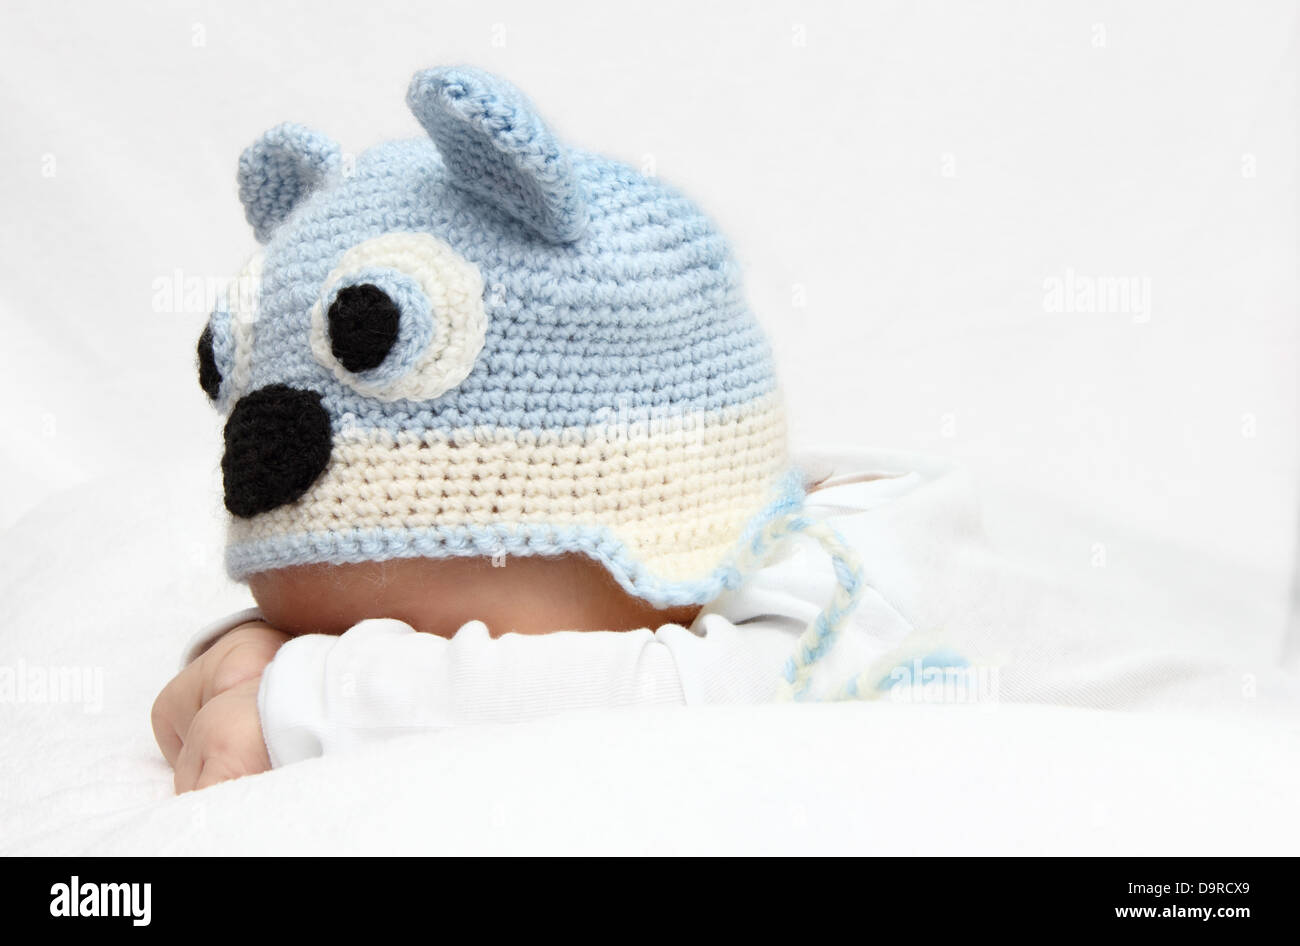 Baby with a knitted blue hat baby on stomach Stock Photo